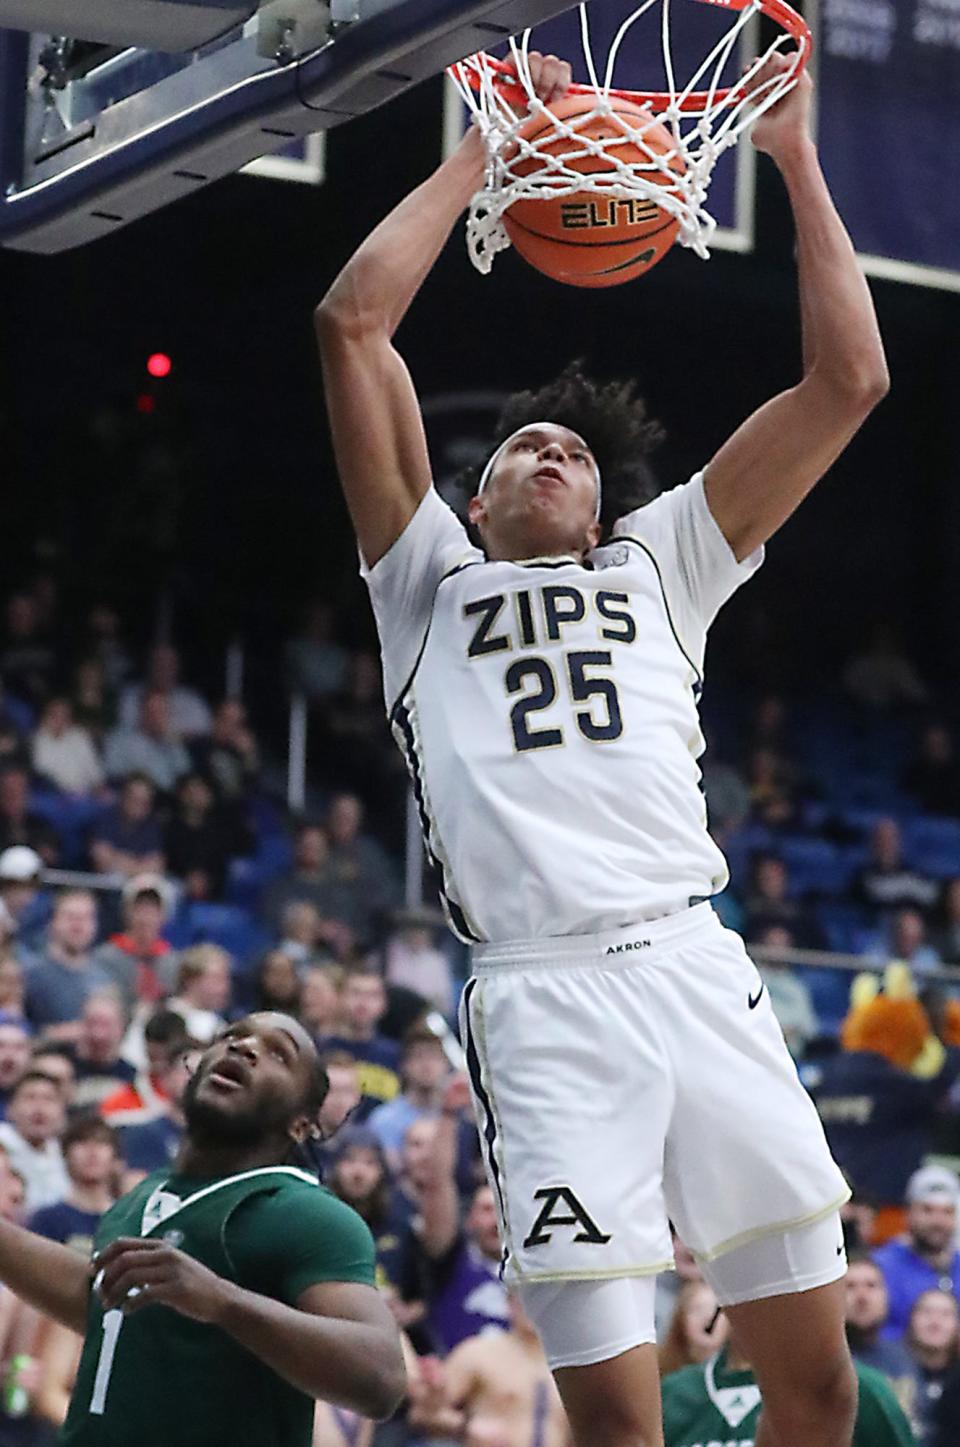 Akron's Enrique Freeman dunks against Eastern Michigan University during a MAC men's basketball game at the University of Akron's James A. Rhodes Arena on Friday, Jan. 13, 2023.